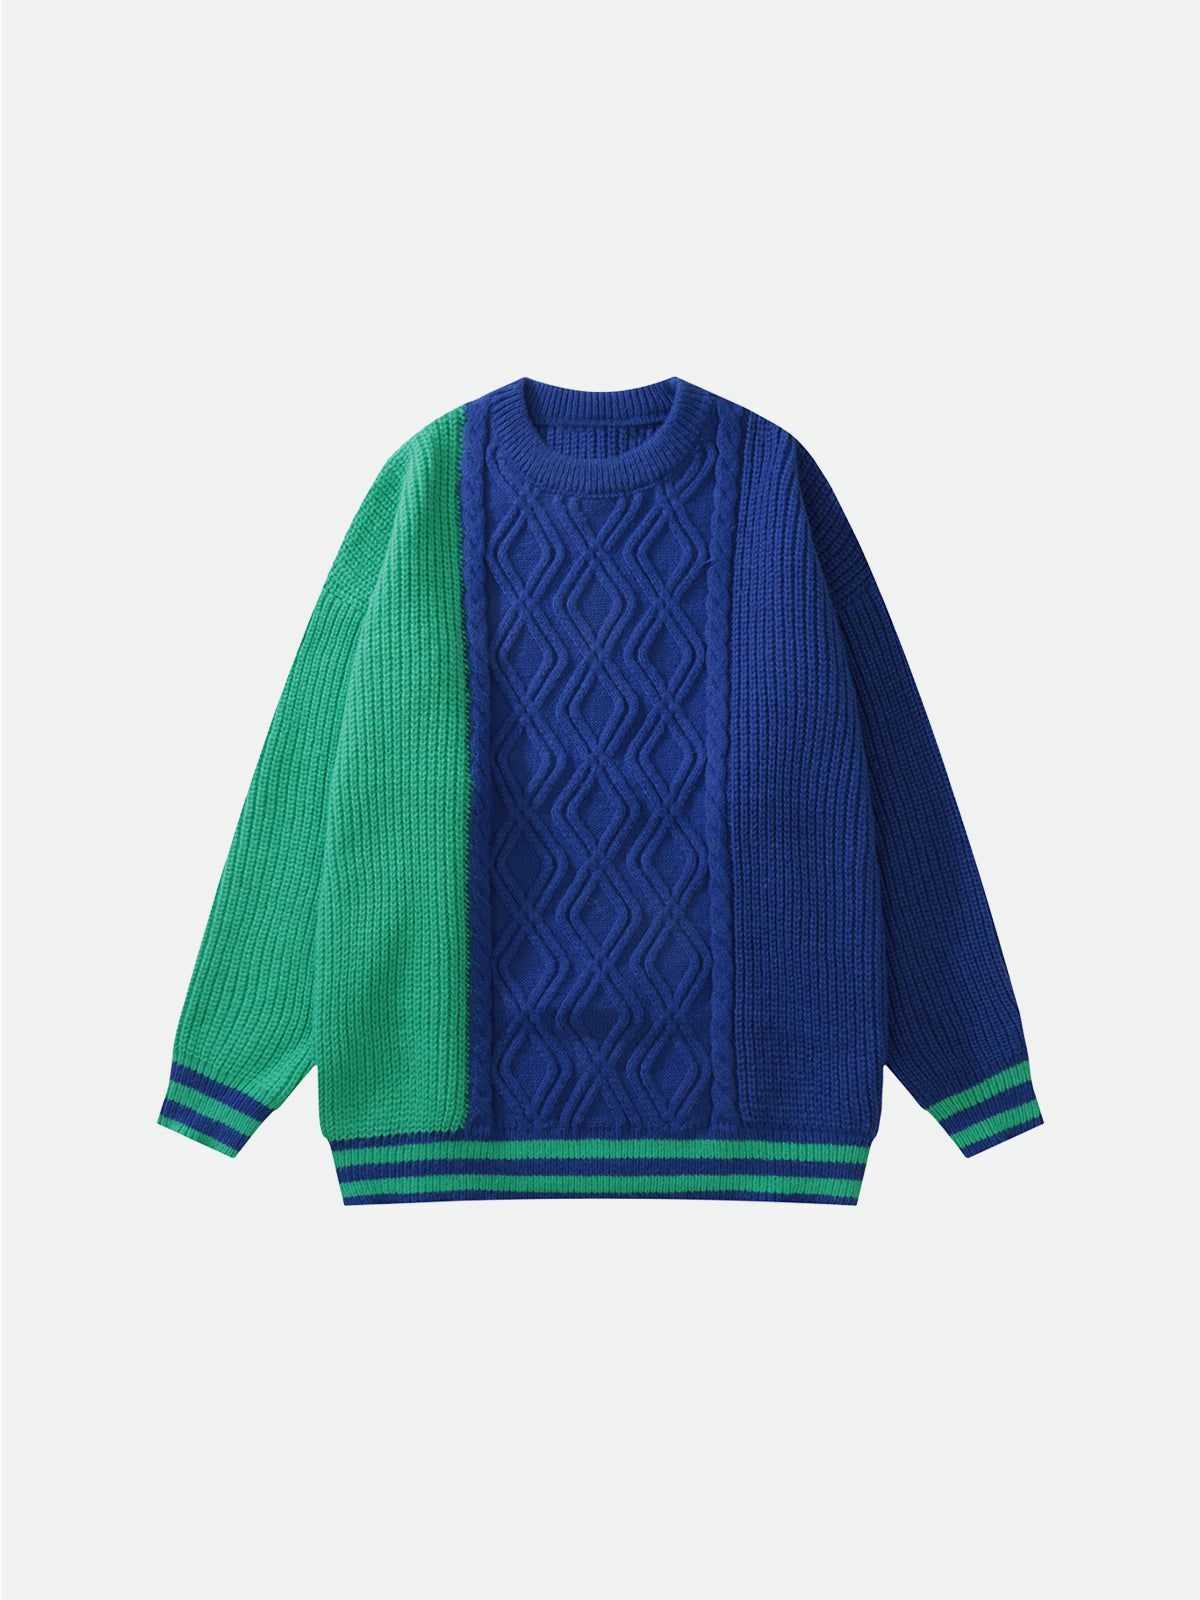 colorful patchwork sweater quirky & retro streetwear 5850